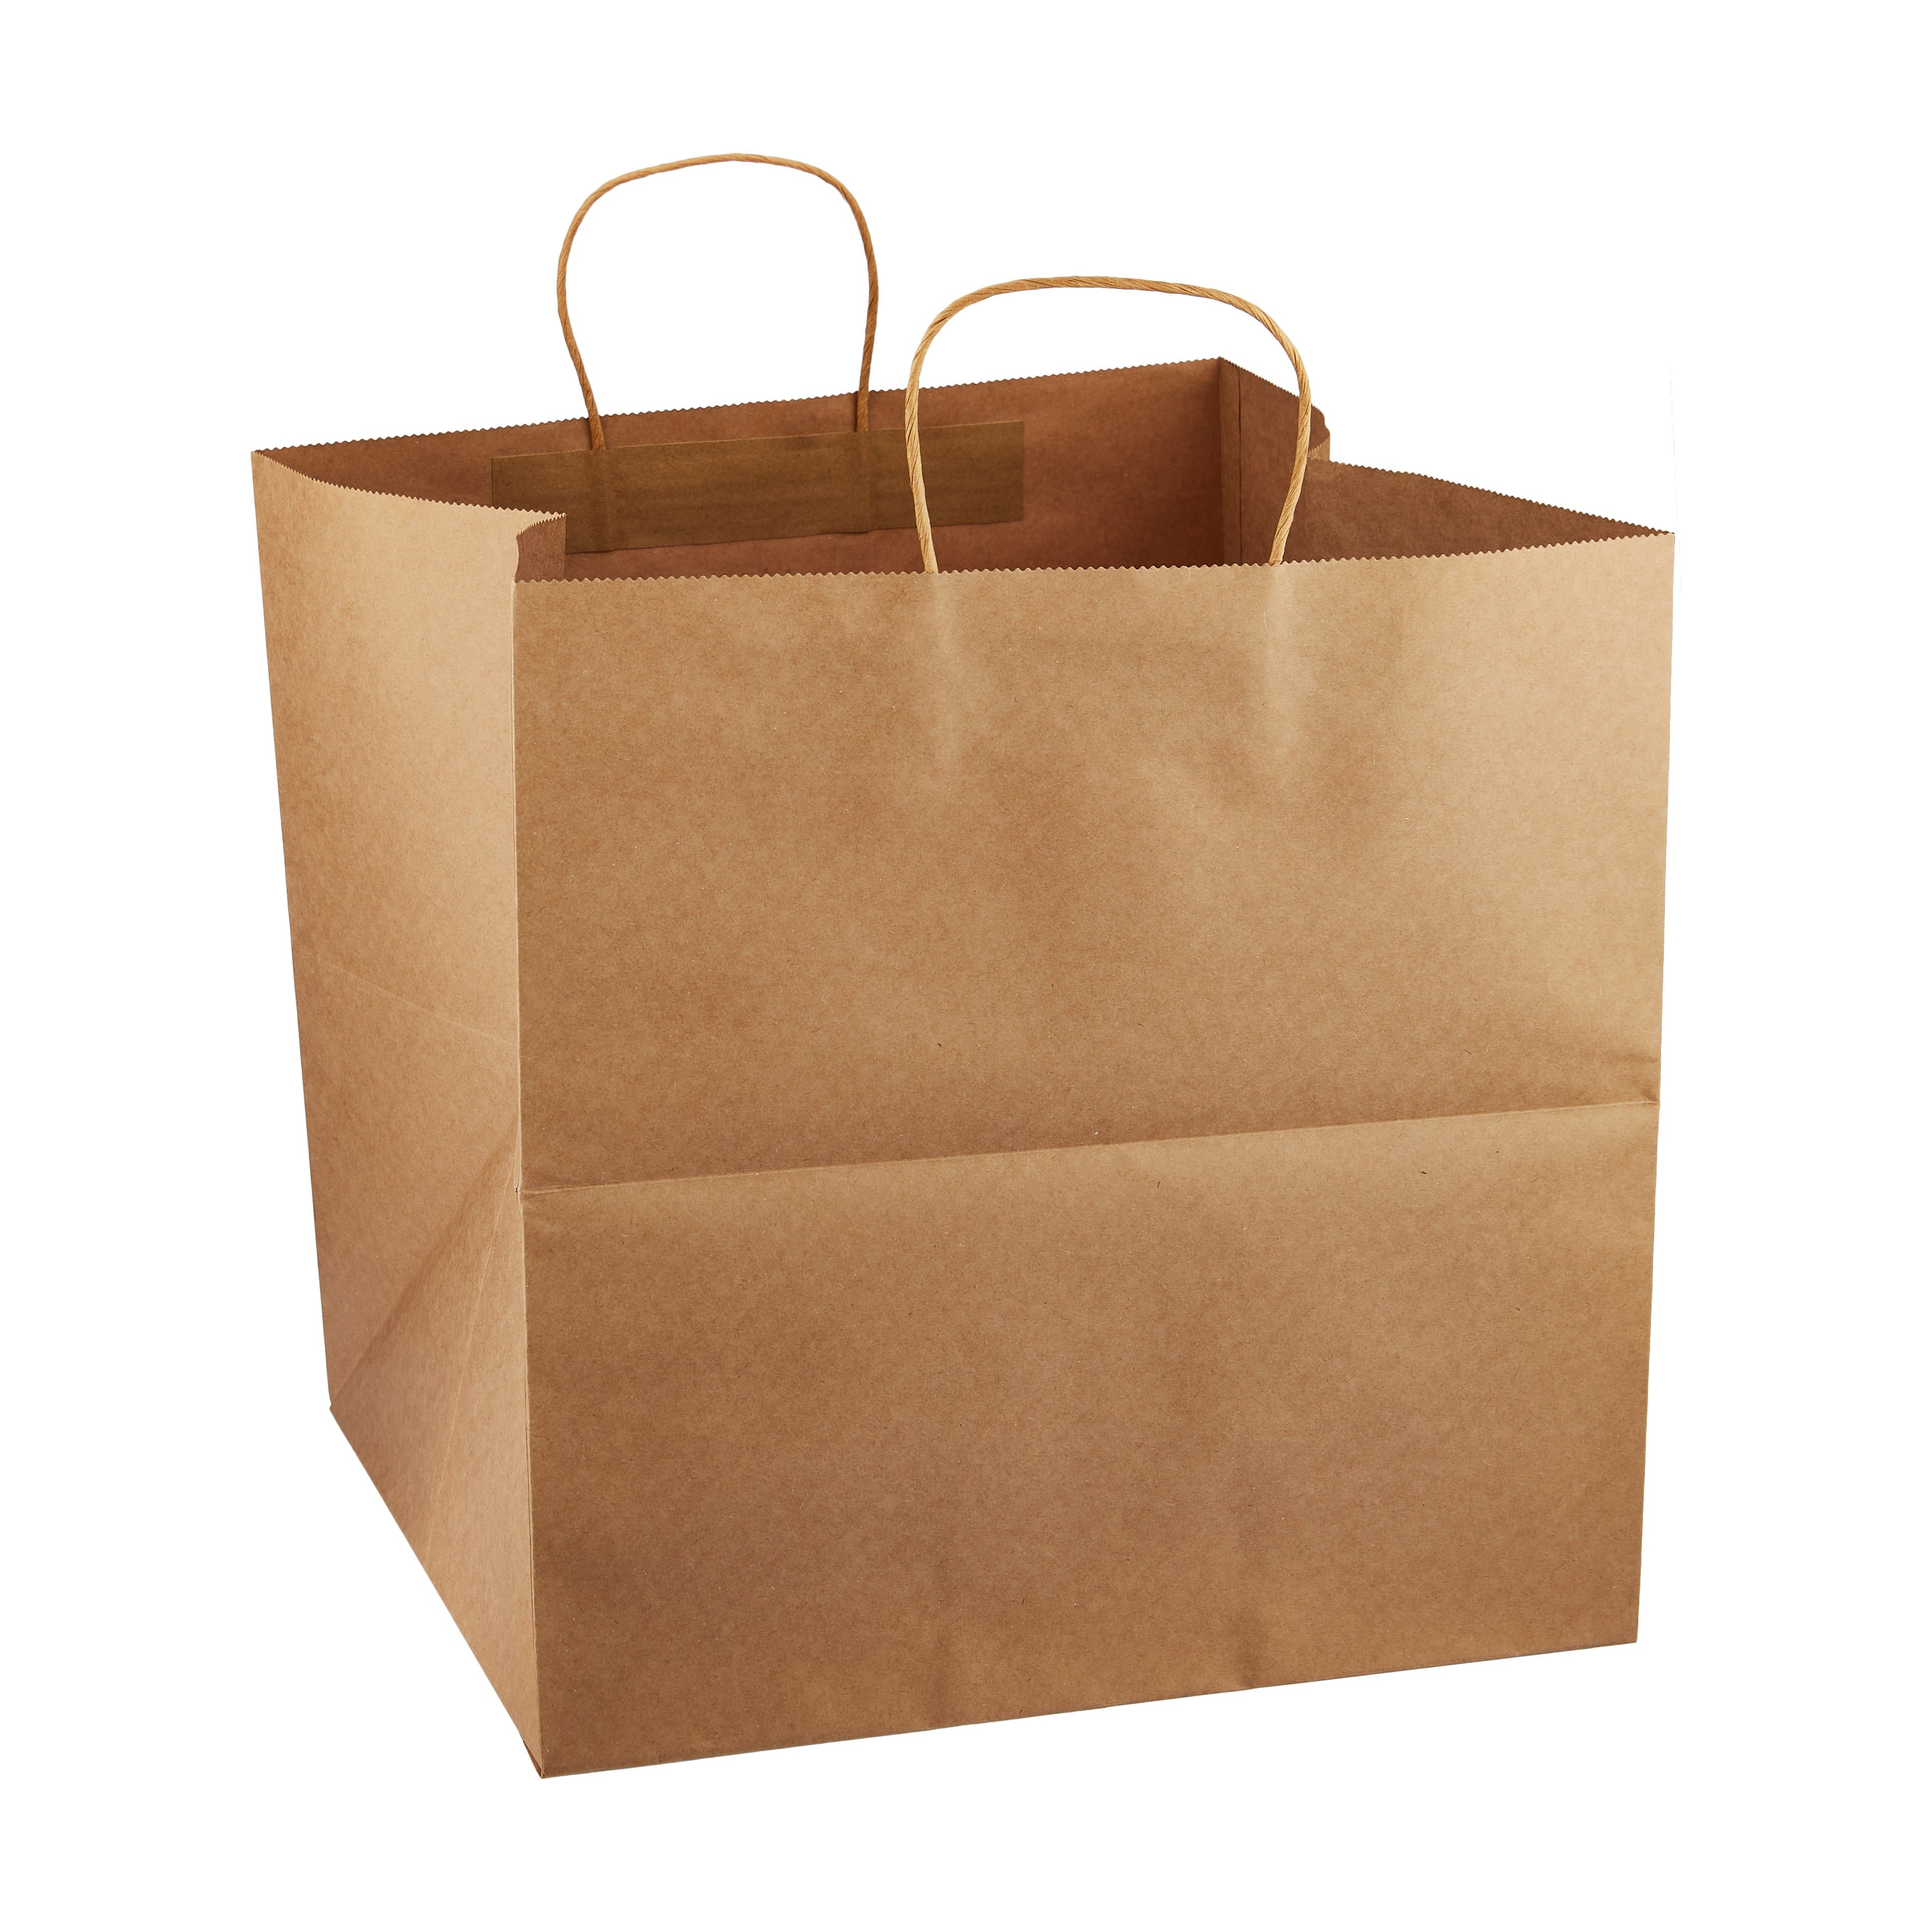 10 x SOS Brown Kraft Paper Carrier Bags For Food, Gift, Party - Size Large